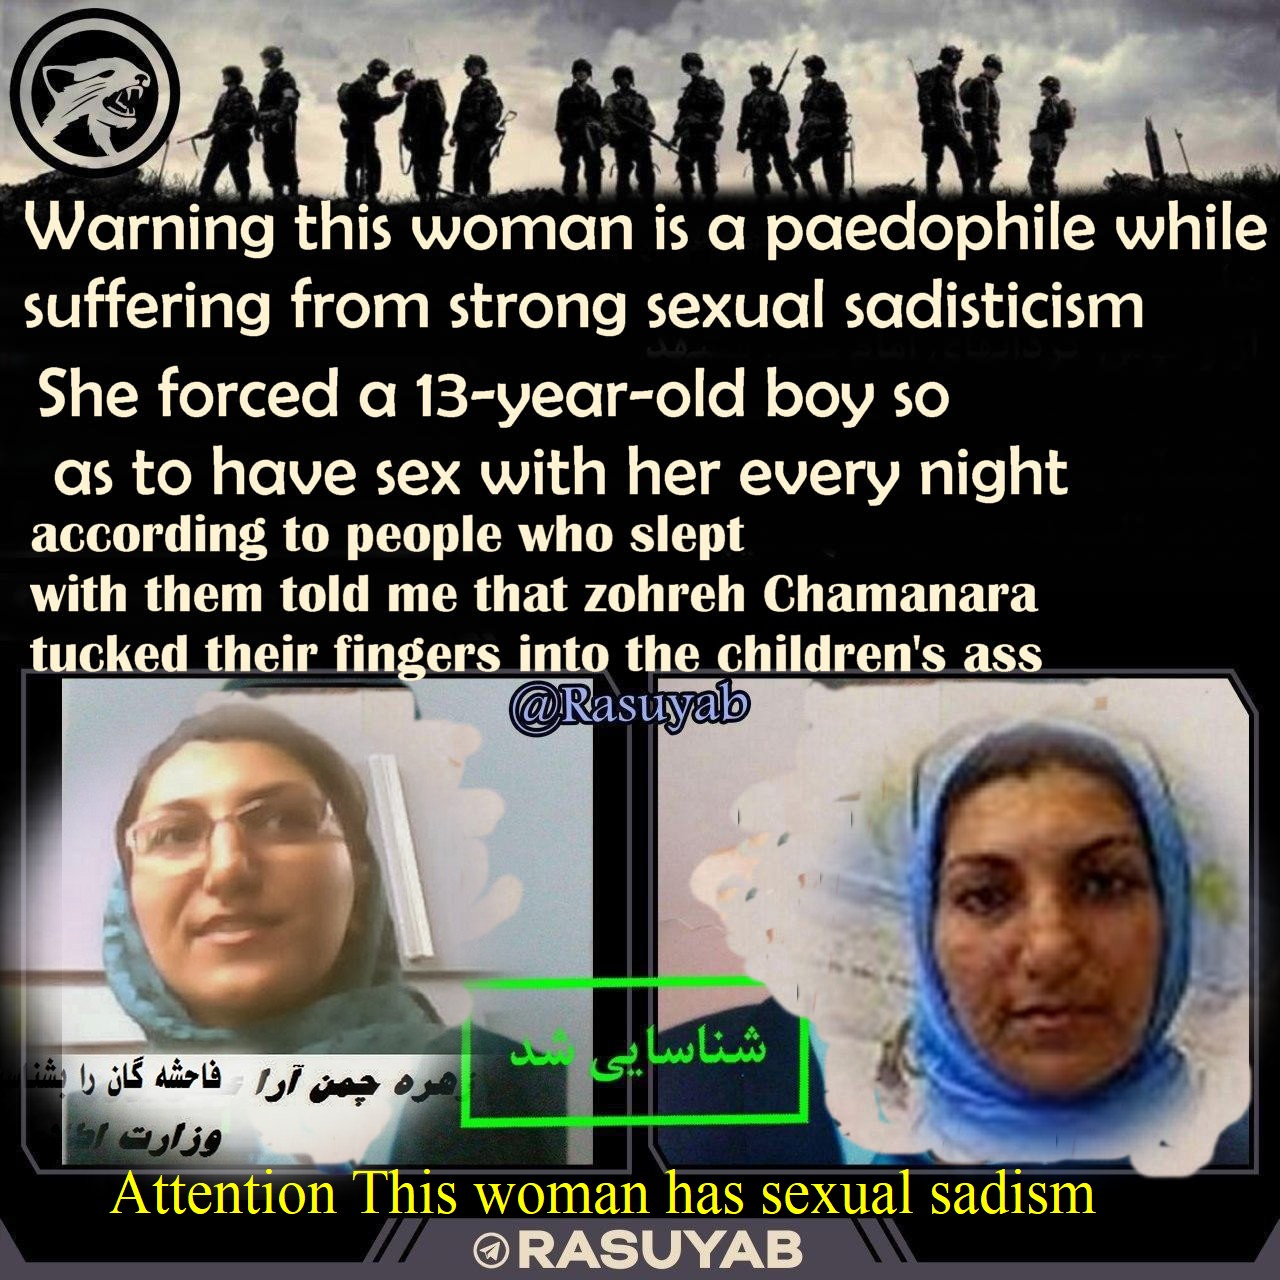 his woman has sexual sadistic, while she is a real paedophile woman.